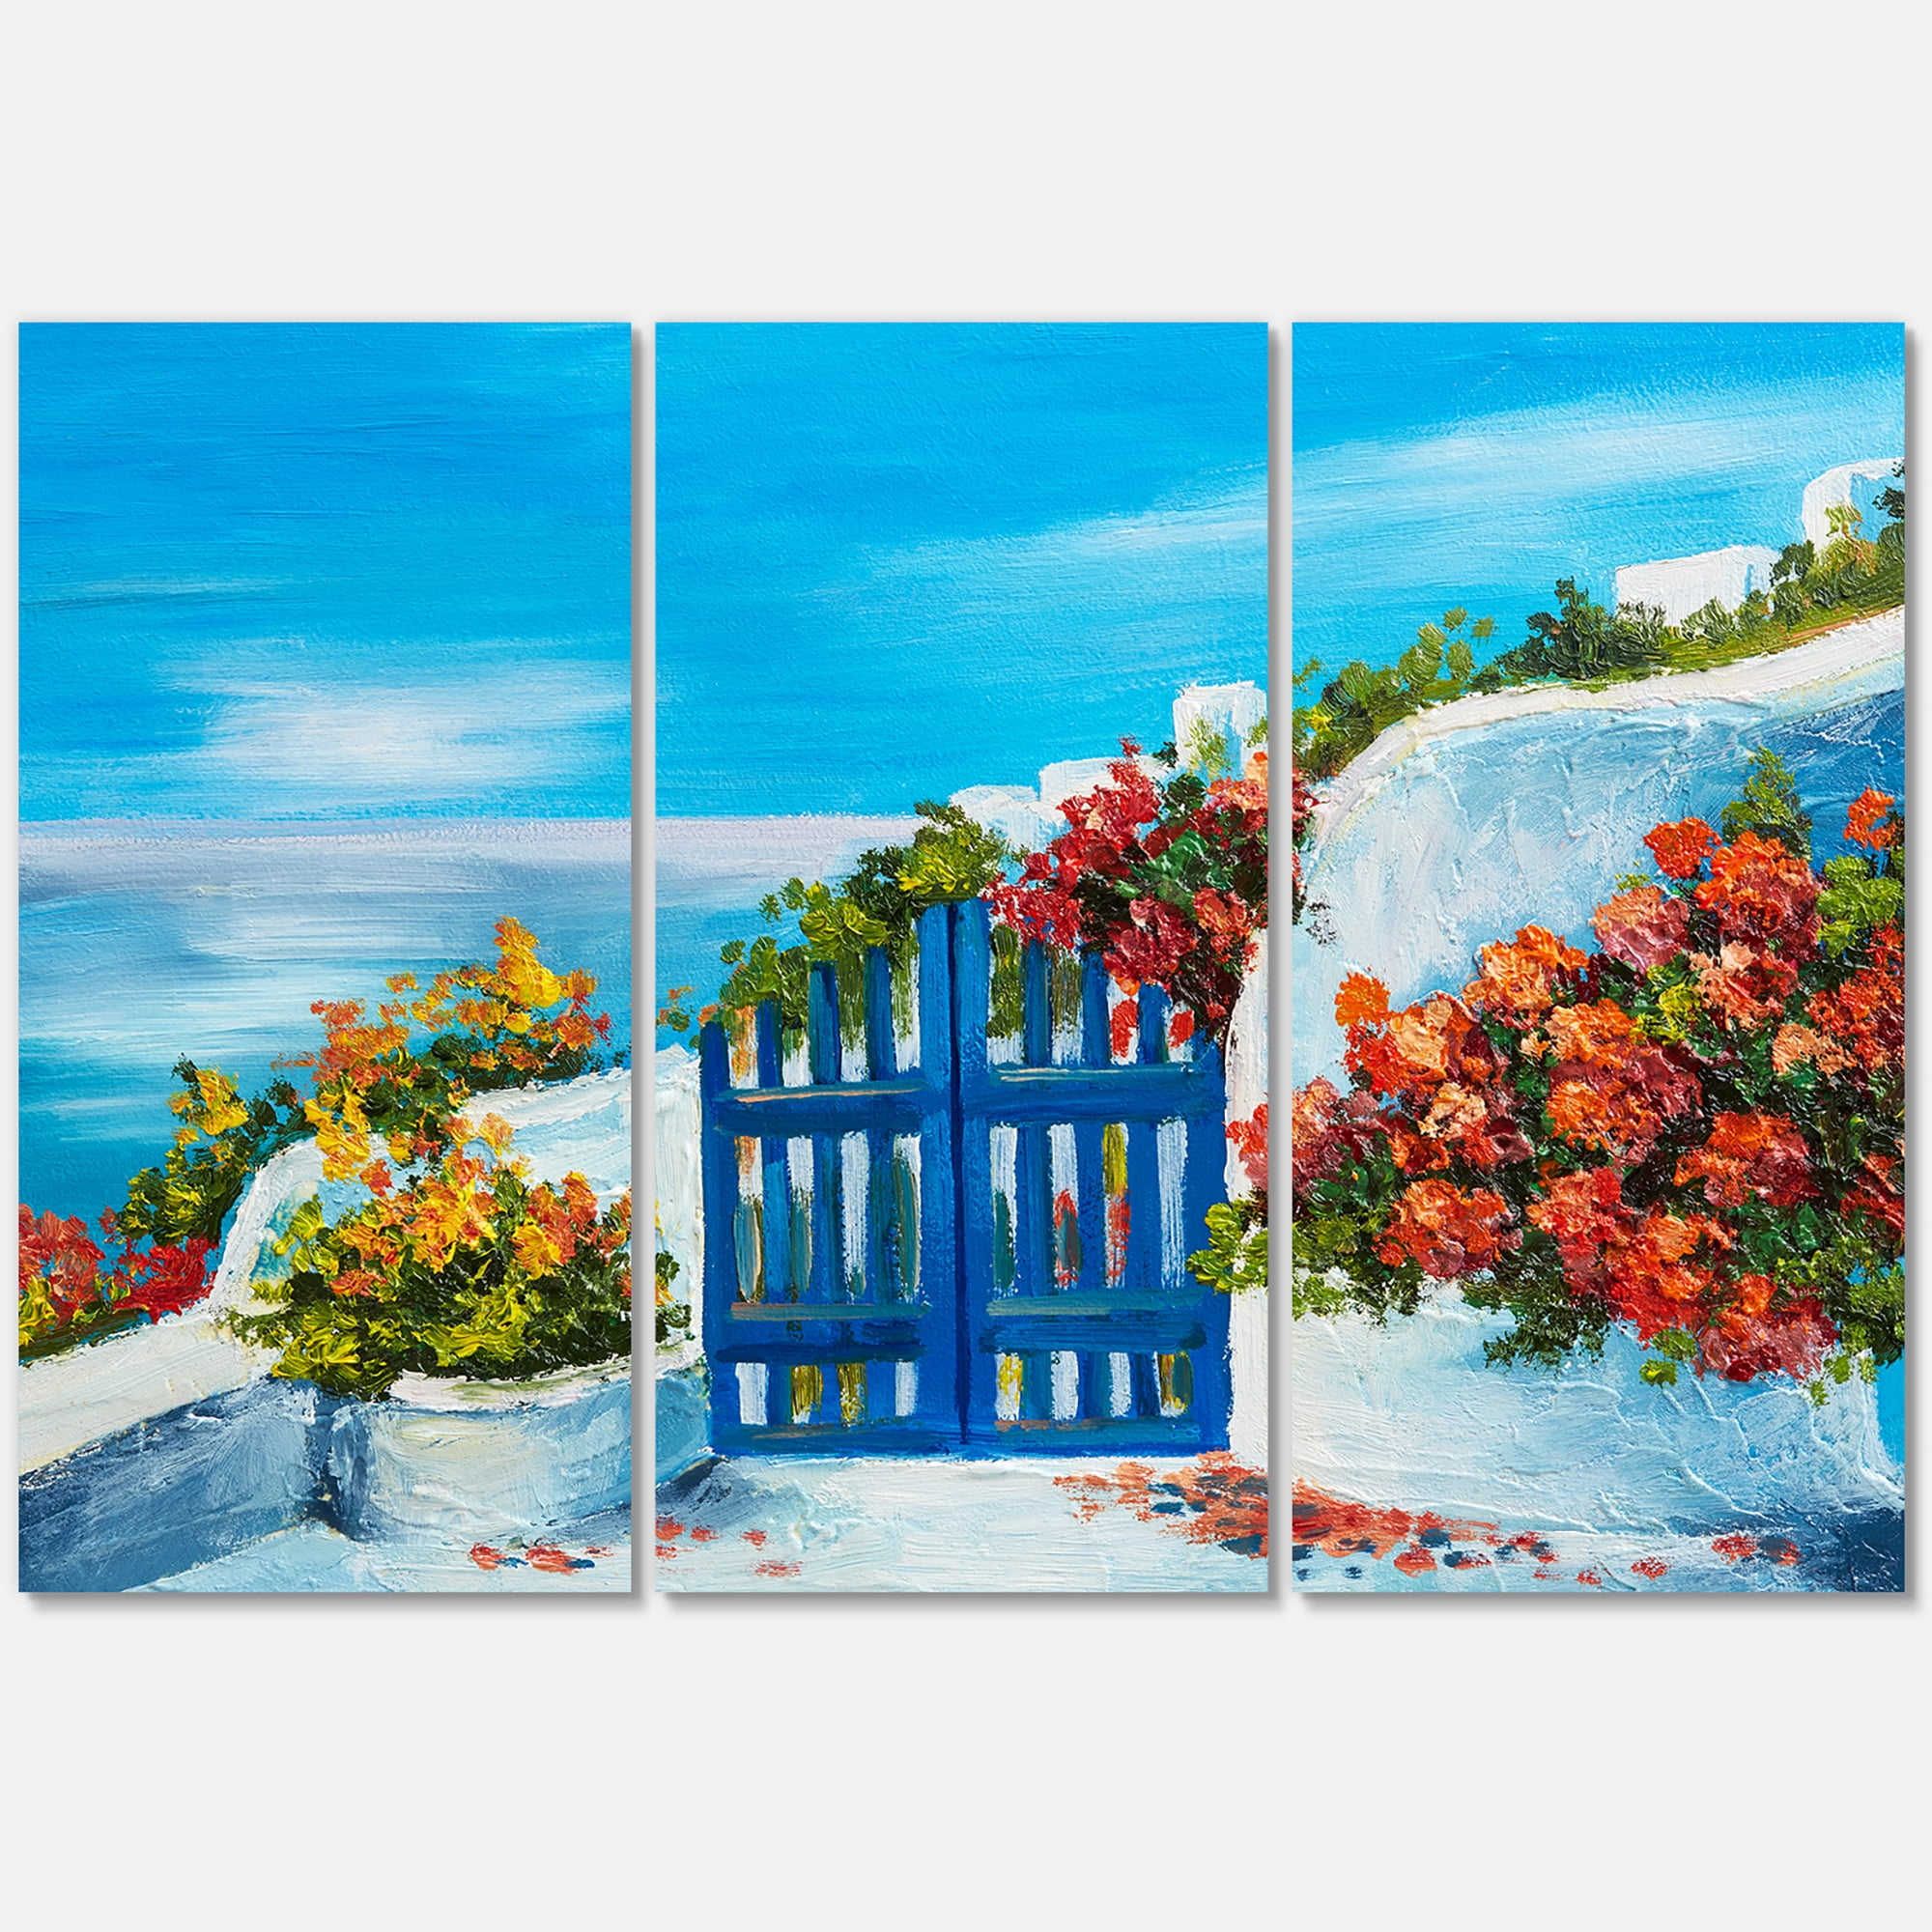 Pink Flowers With Traditional Greek House 36 in x 36 in Framed Painting  Canvas Art Print, by Designart